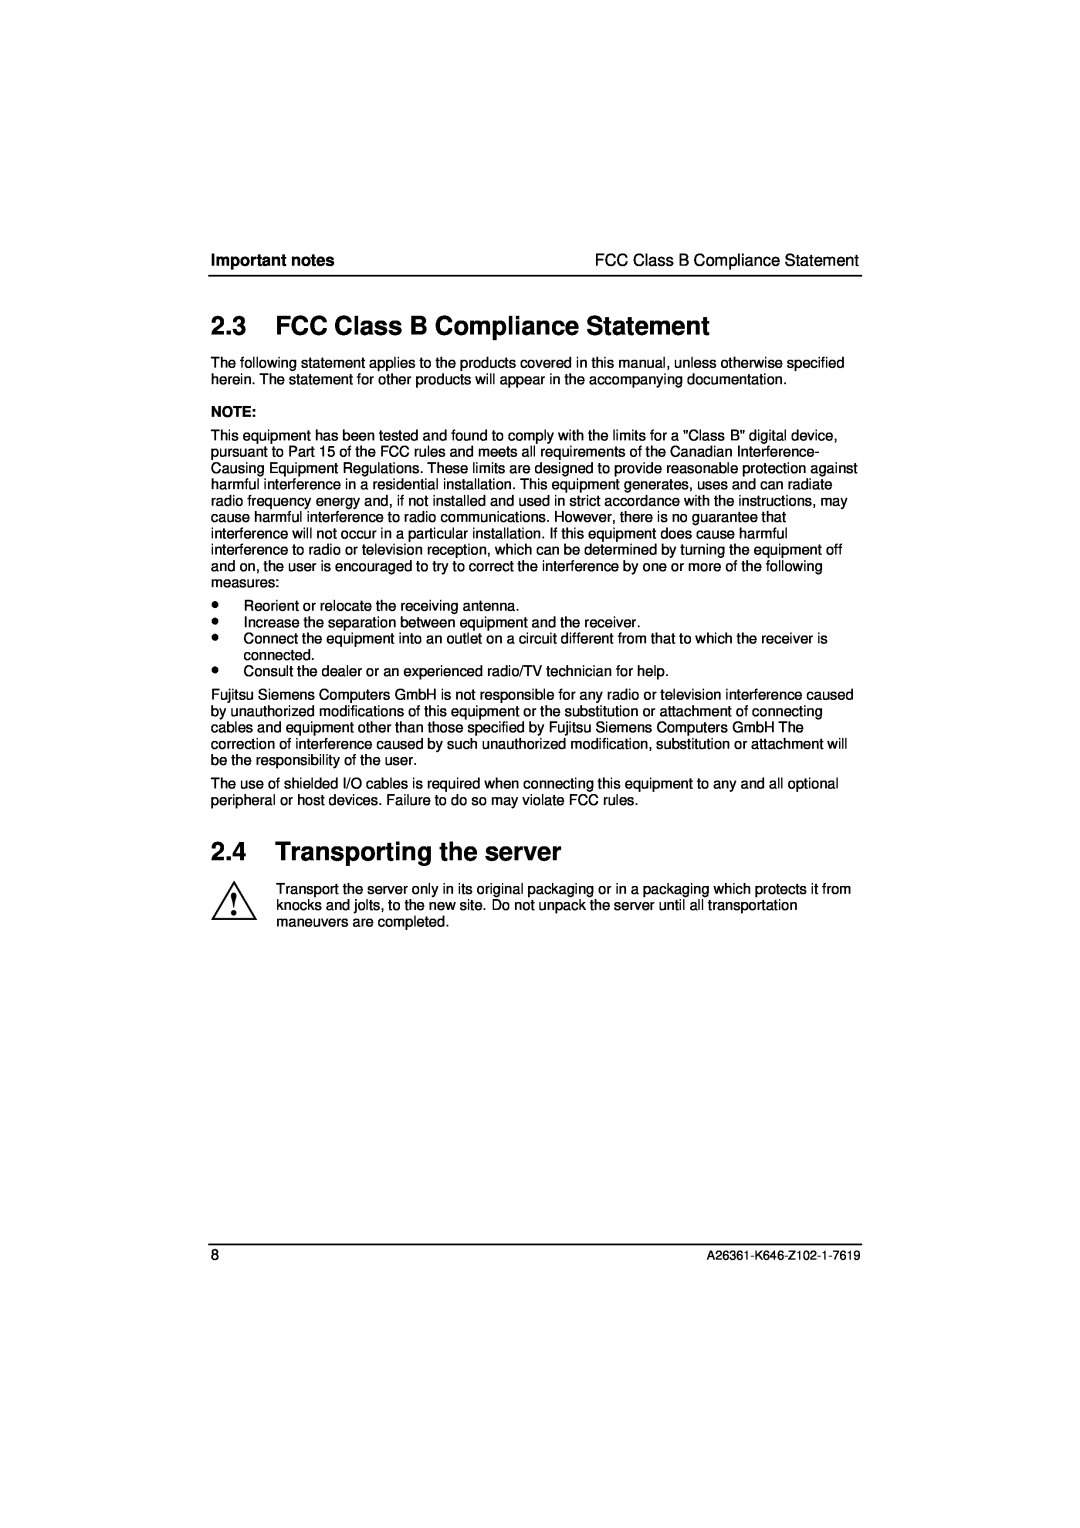 Fujitsu B120 manual FCC Class B Compliance Statement, Transporting the server, Important notes 